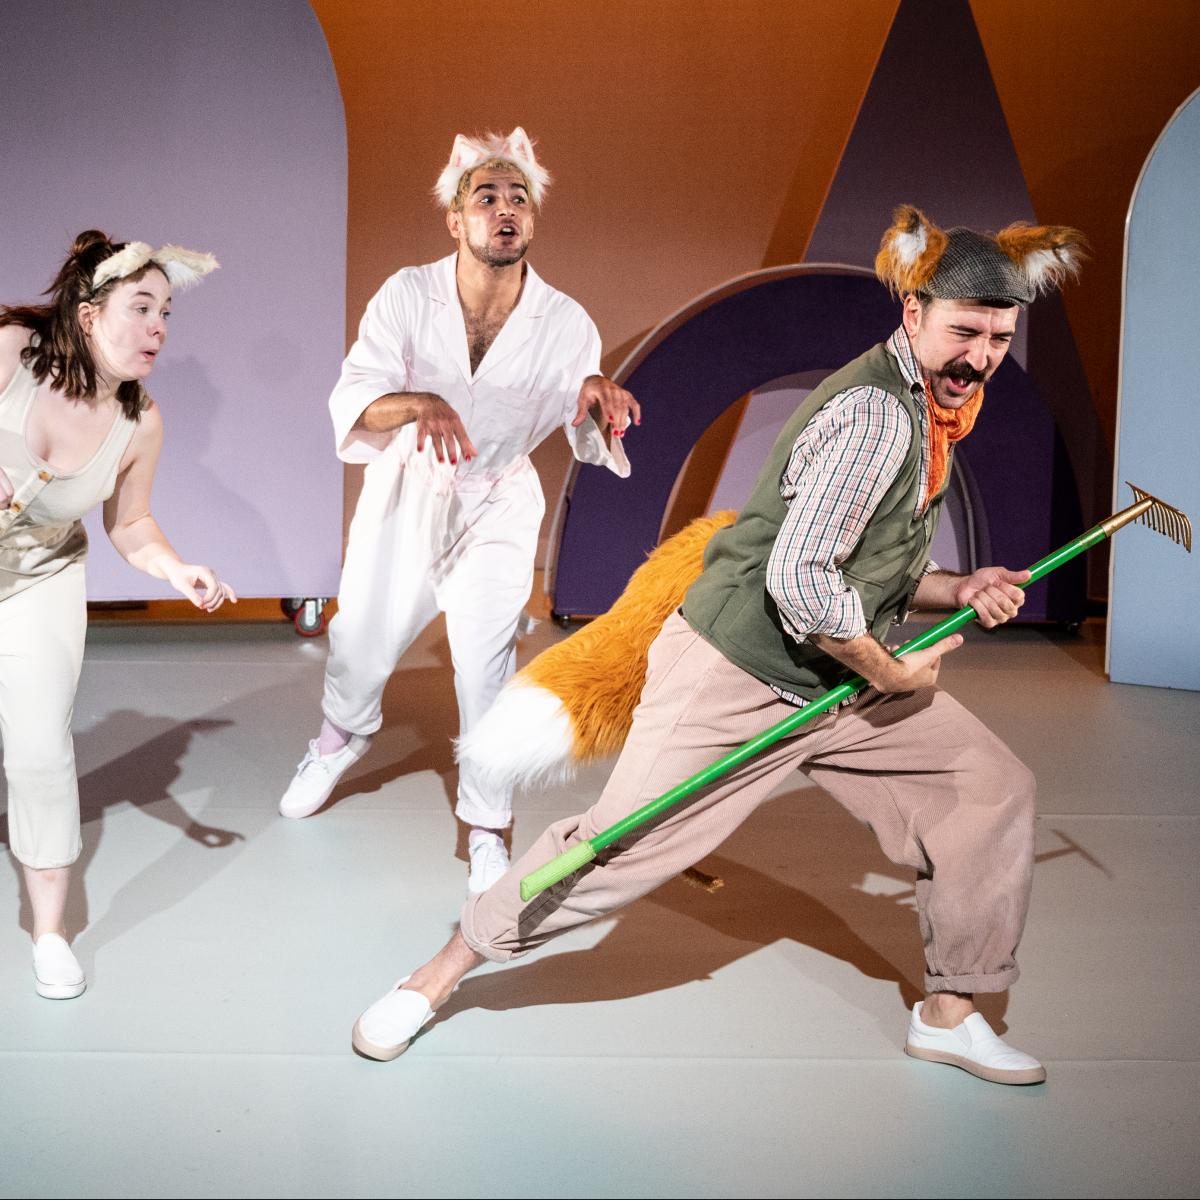 Production image of Milk Presents' Marty and the Party 